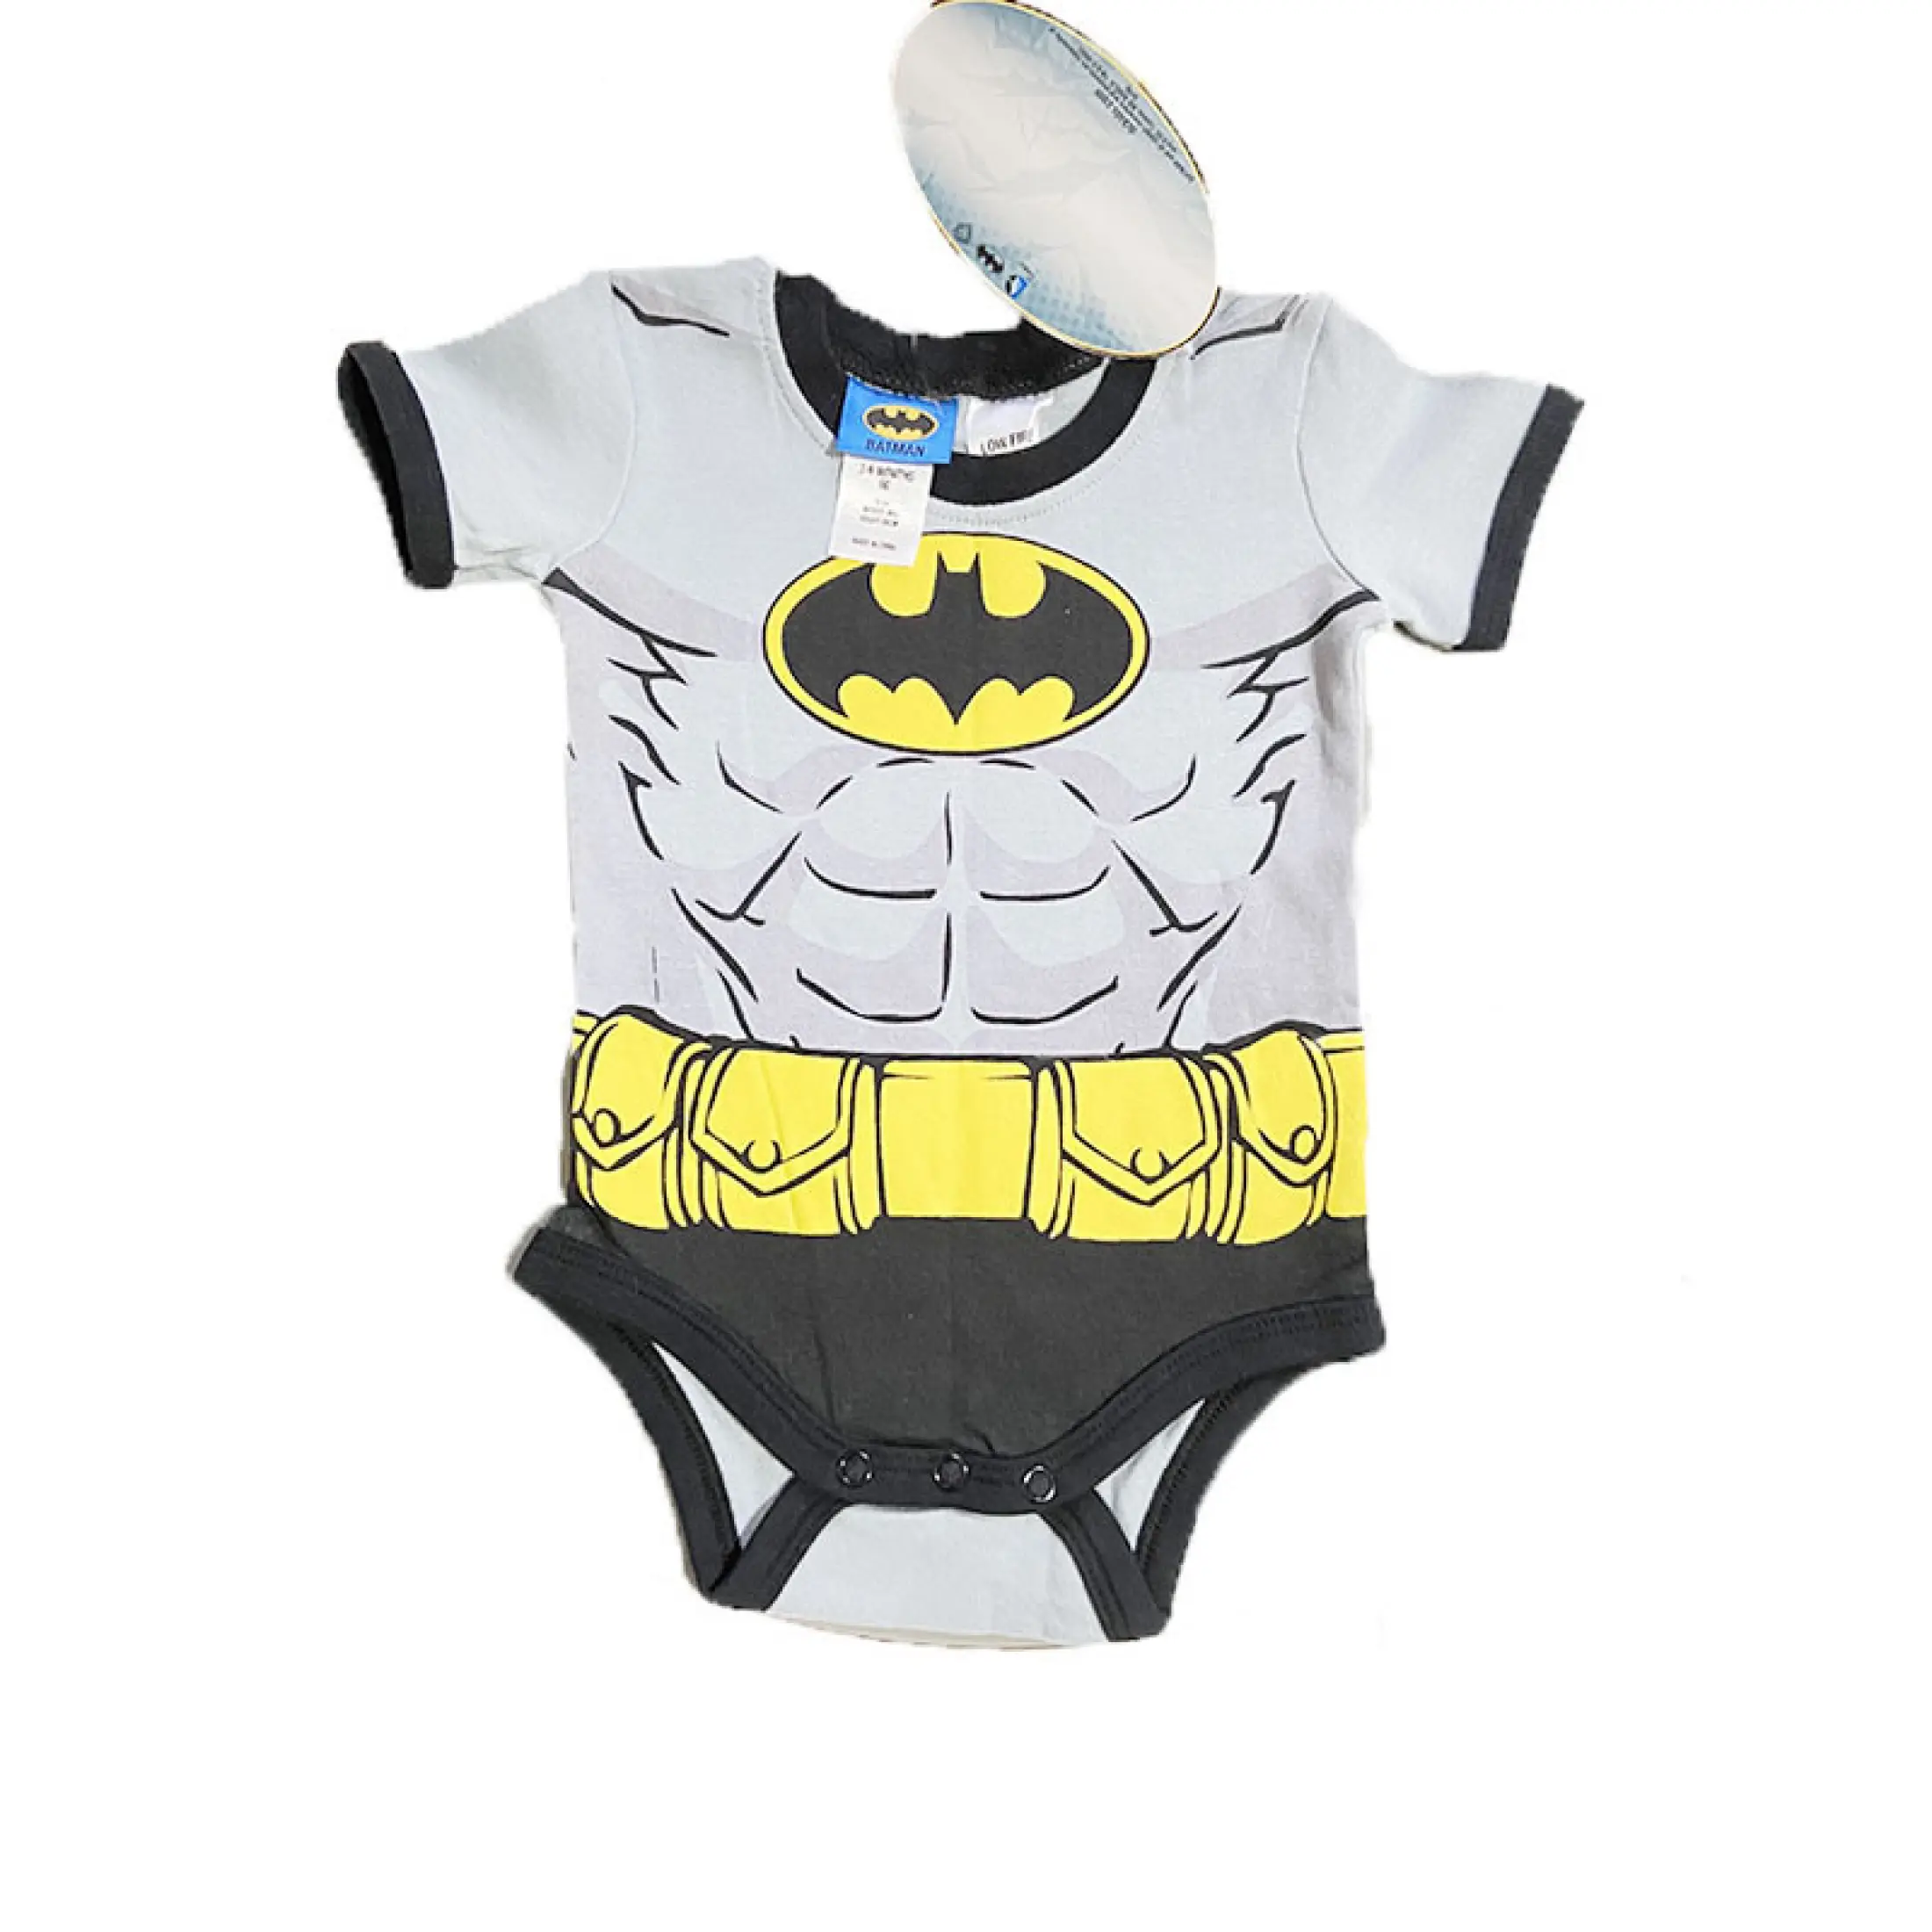 0 24m Baby Boy S Fashion Short Sleeves Romper Batman Bebe 100 Cotton Onesies Infants 0 2 Years Old Outfits Comfortable Children Outwear All In One Pieces Baby Bodysuits Lazada Singapore